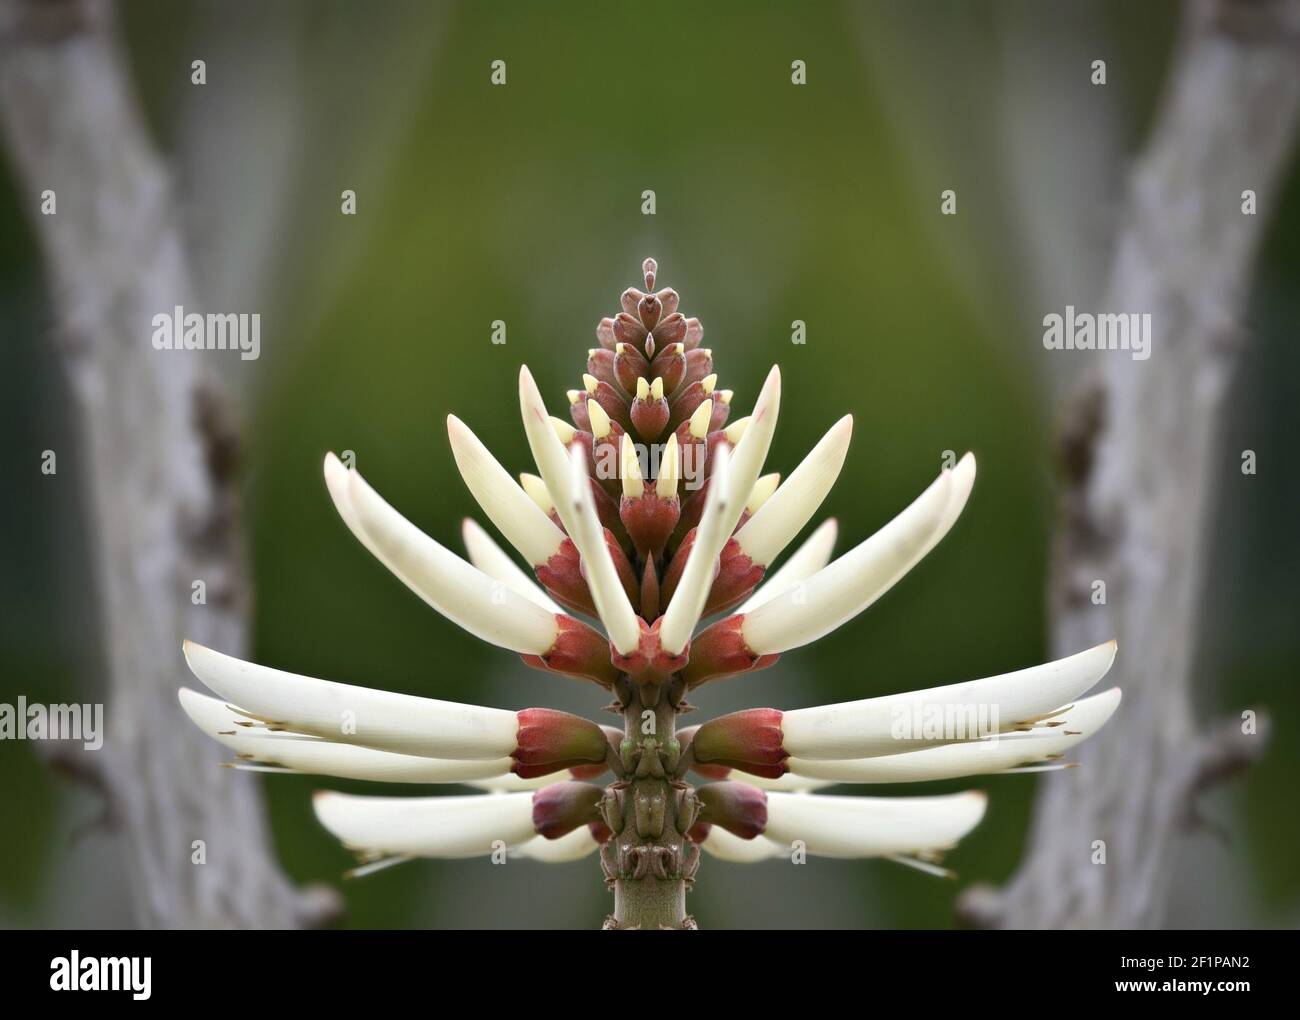 Erythrina speciosa (Coral tree) a tropical plant with white flower spikes on an abstract composition. Stock Photo